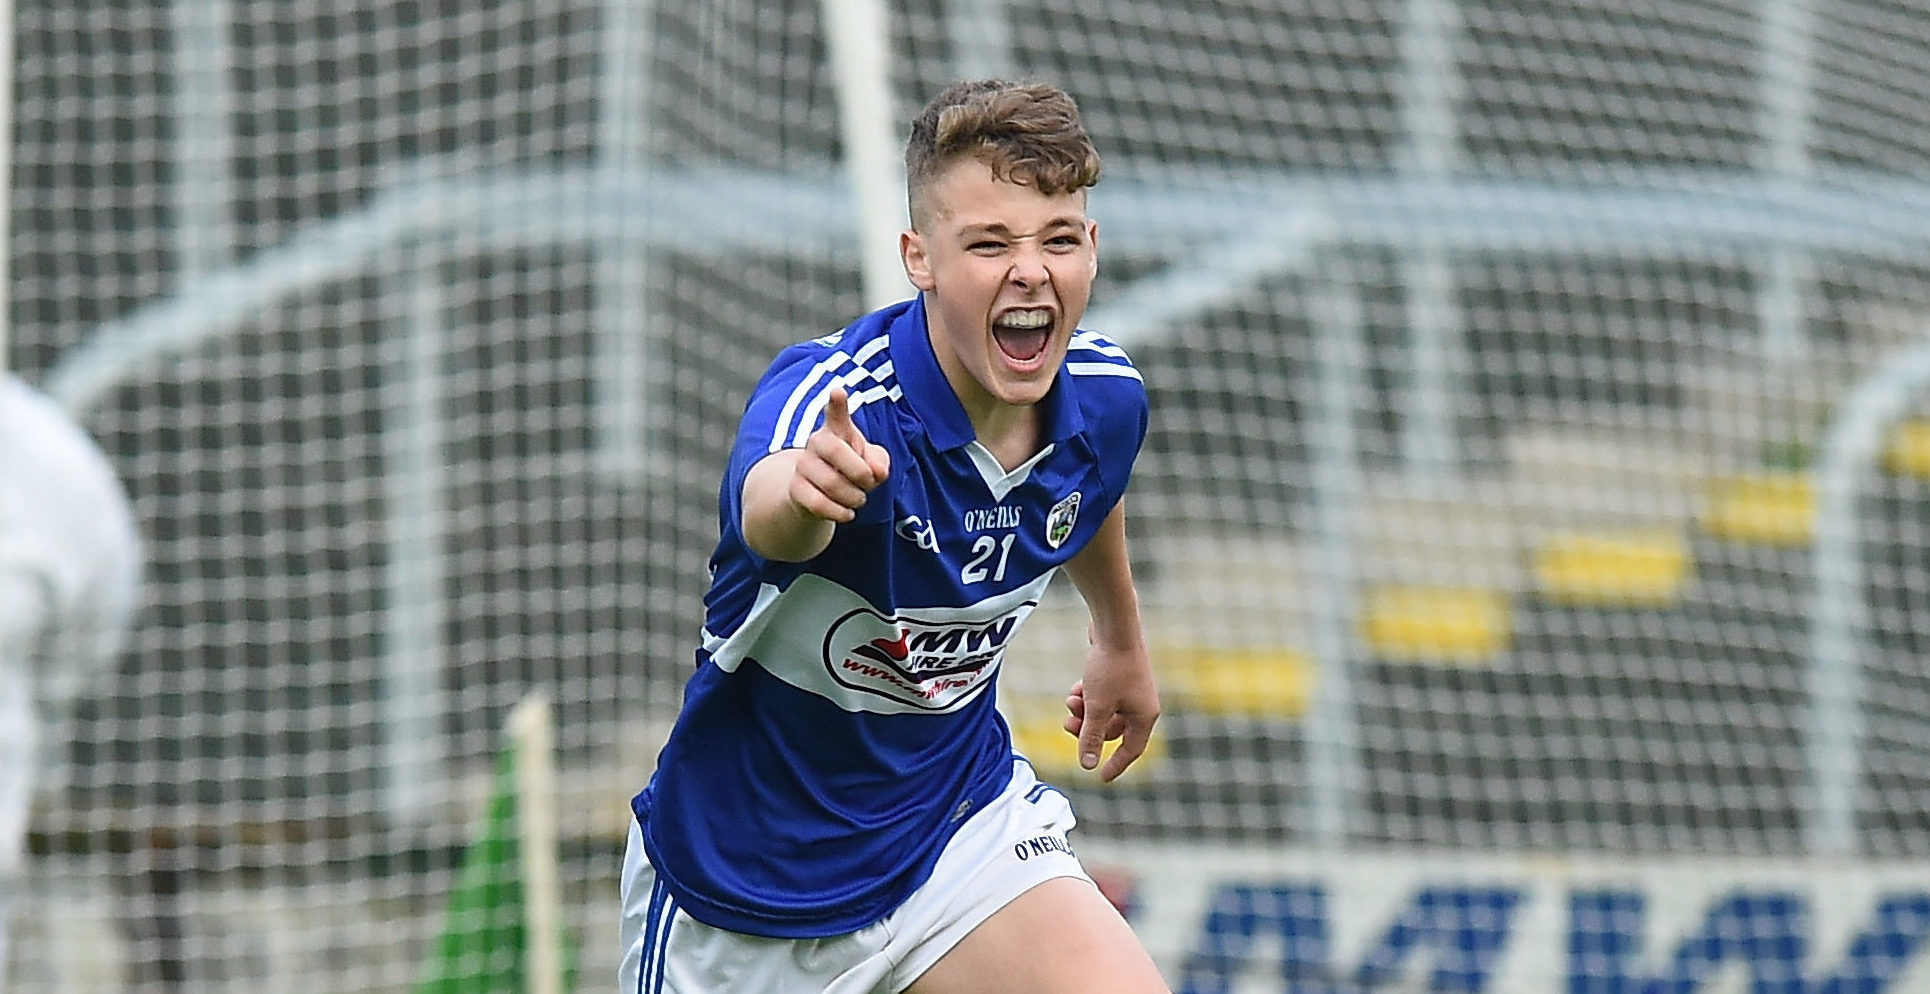 Evan Lowry celebrates after scoring his side's goal during the Leinster Minor Championship Semi-Final match between Laois and Offaly